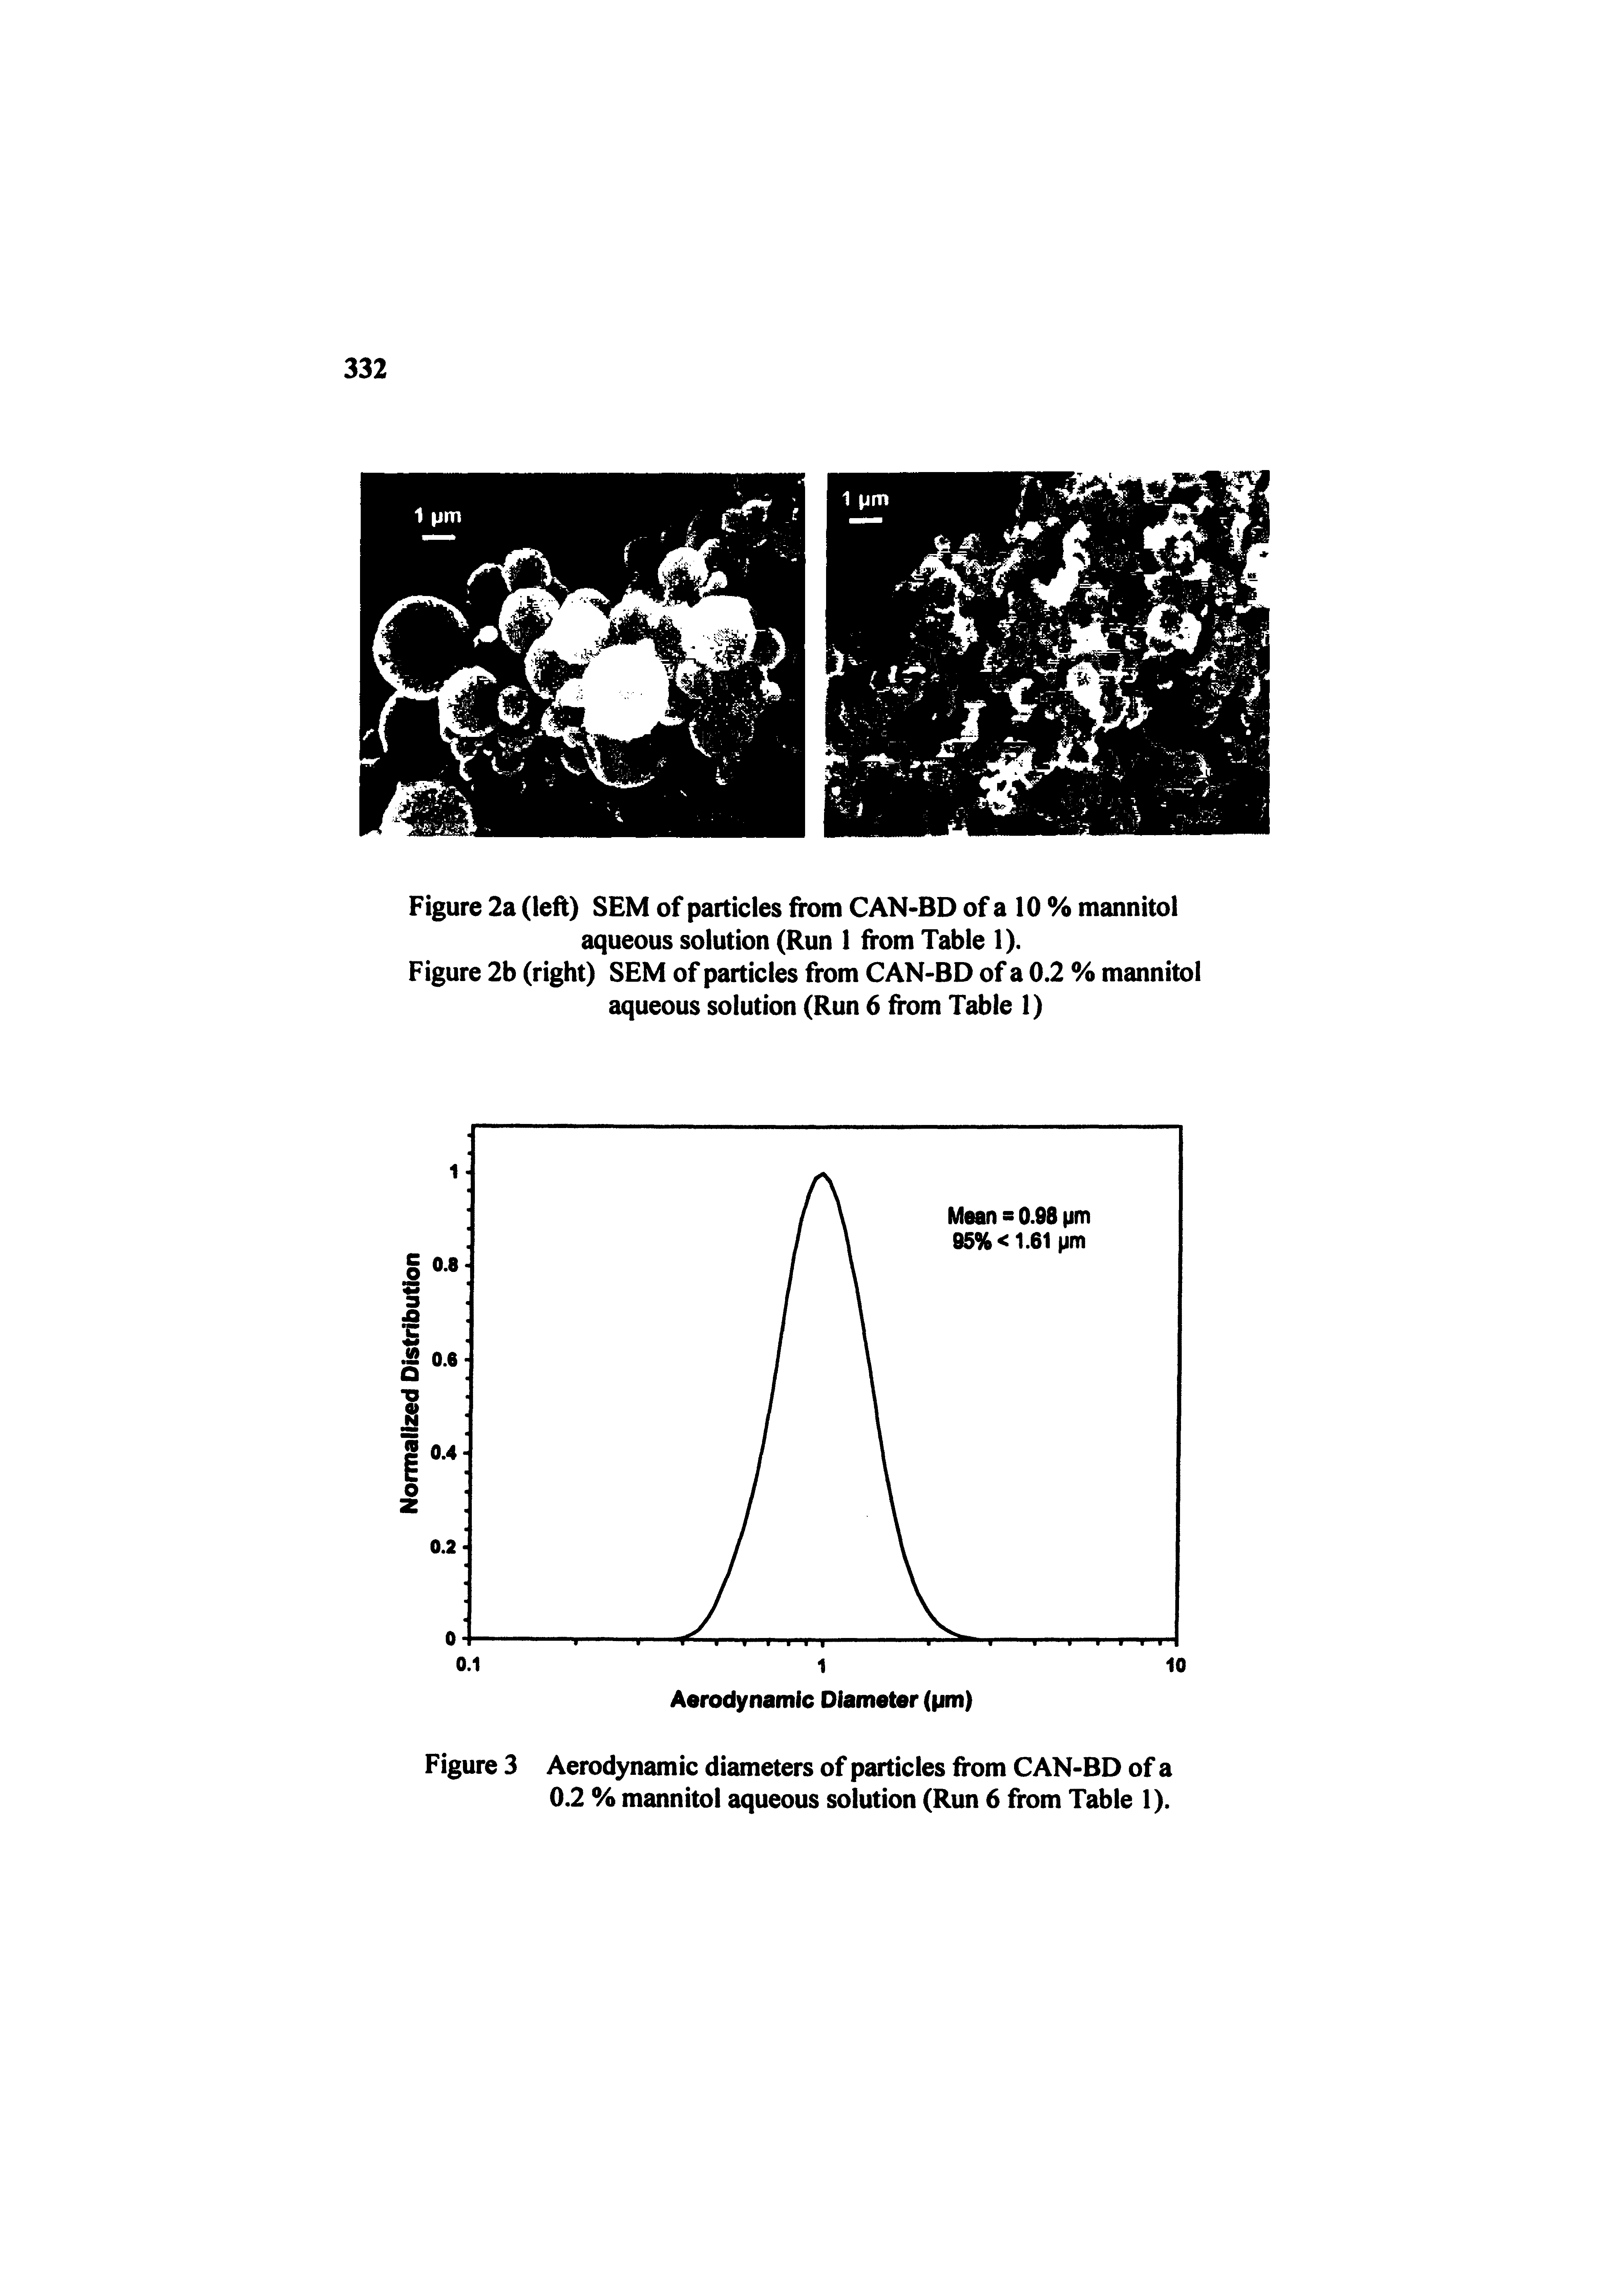 Figure 3 Aerodynamic diameters of particles from CAN-BD of a 0.2 % mannitol aqueous solution (Run 6 from Table 1).